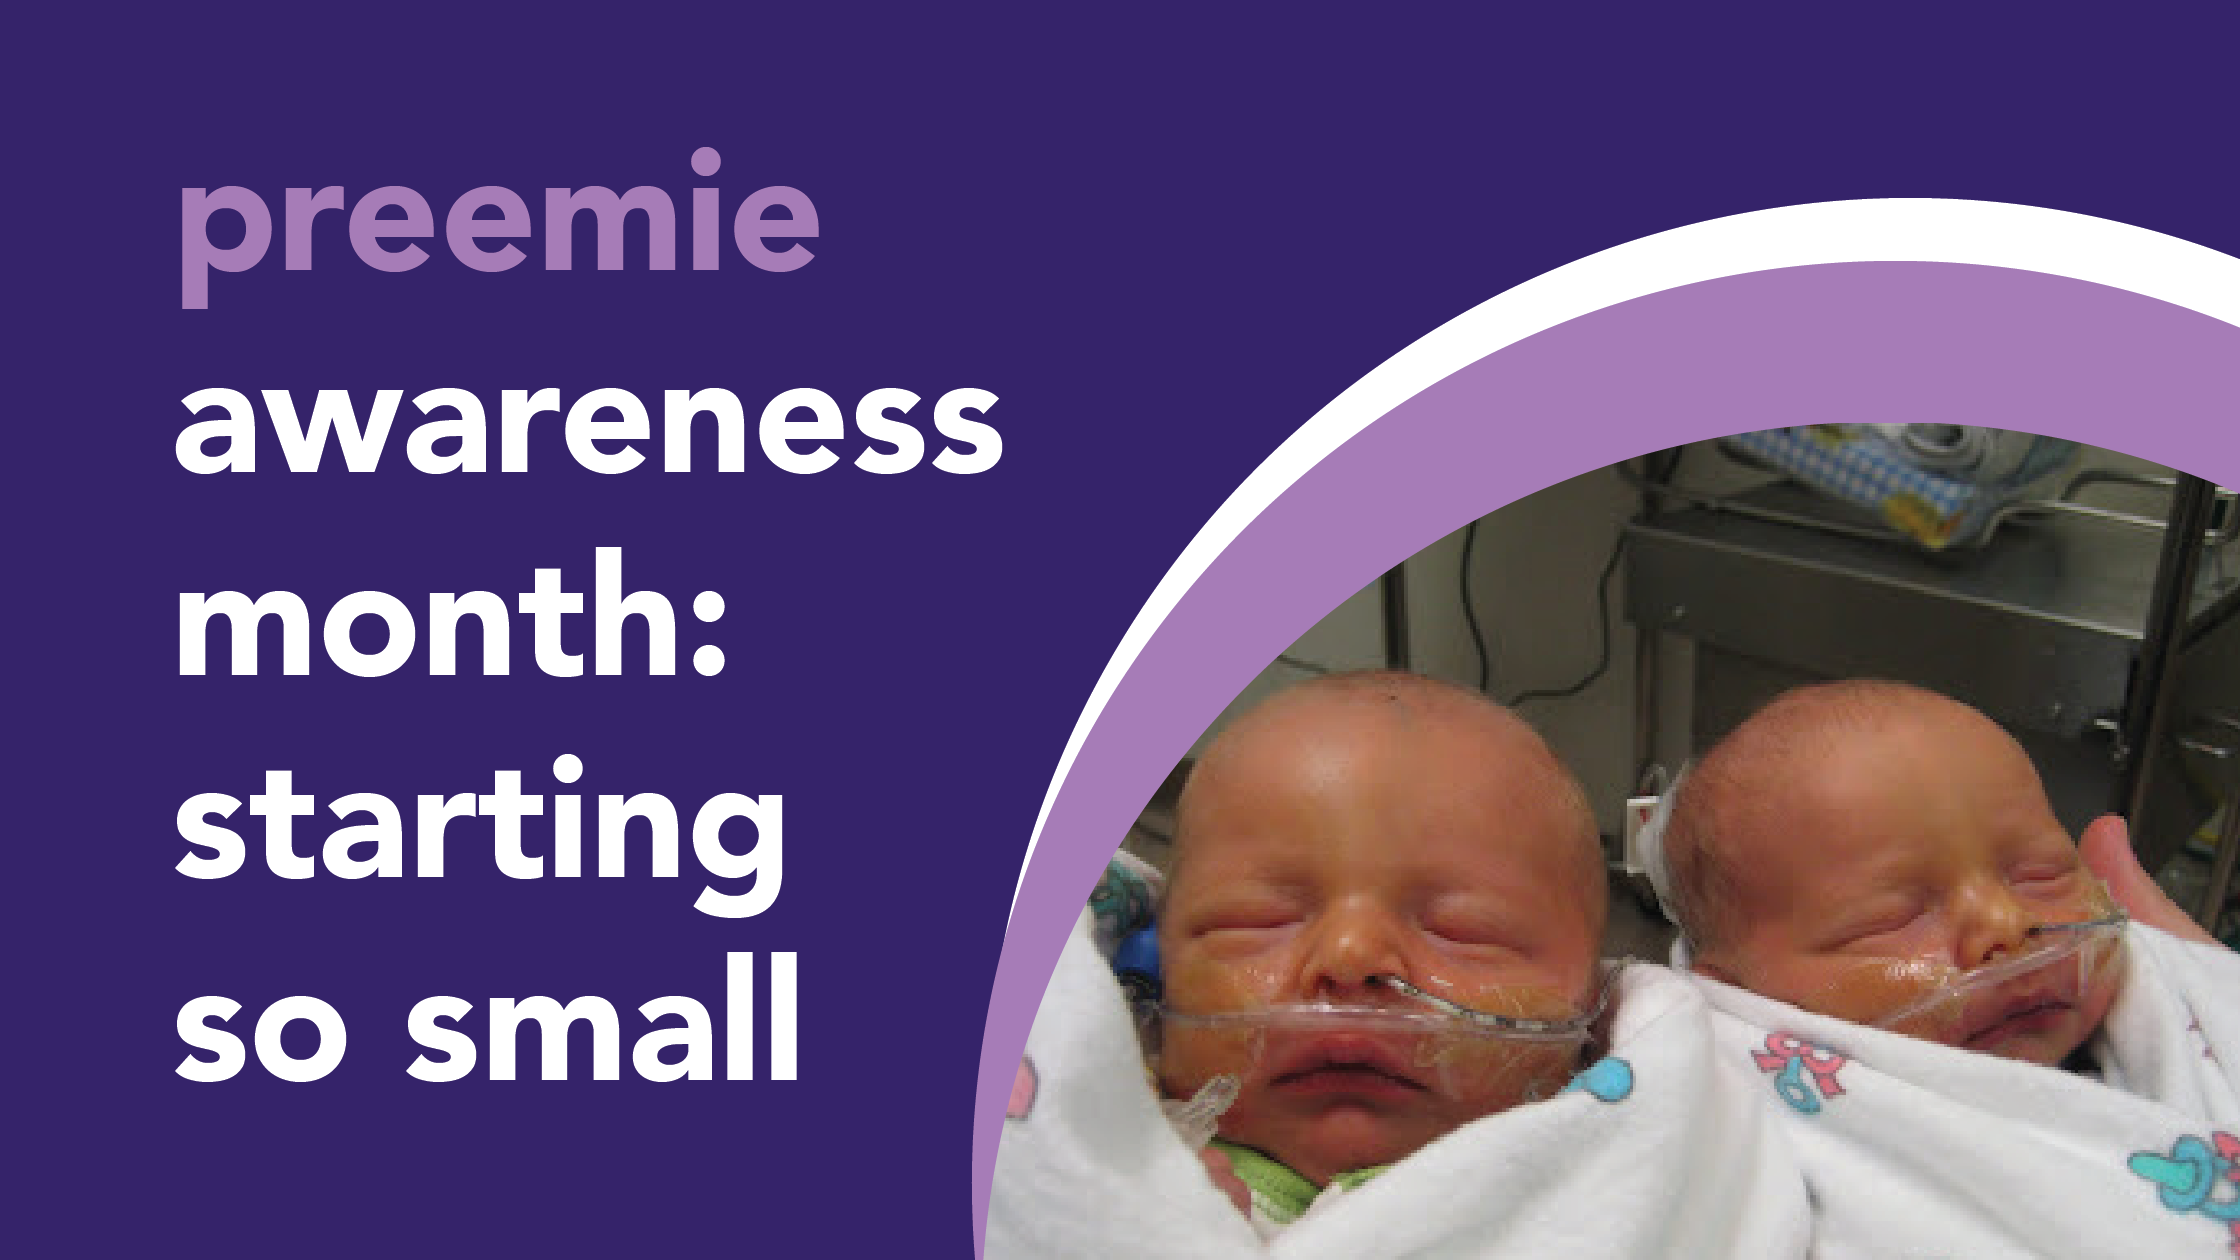 graphic with text "preemie awareness month: starting so small" with image of two preemie babies with breathing tubes